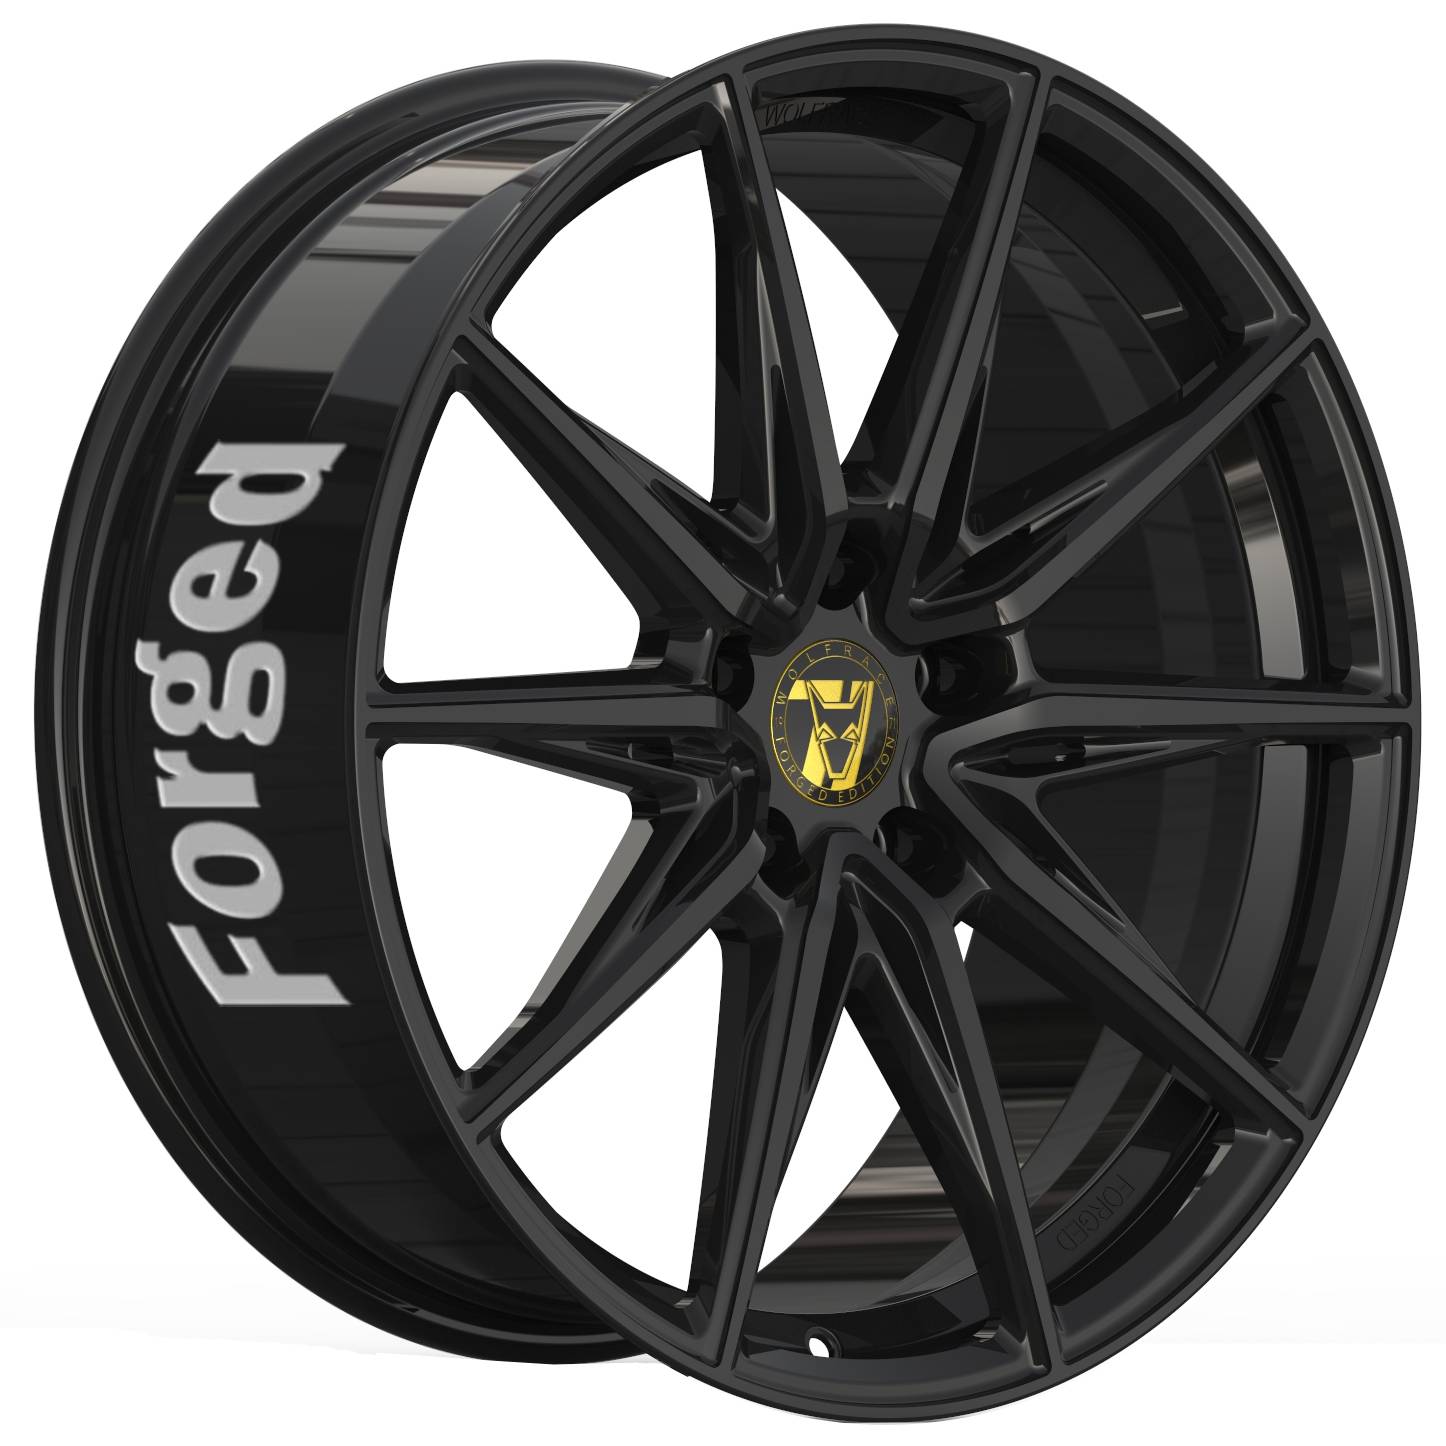 Jantes alu Demon Wheels 71 Forged Edition Urban Racer Forged [8.5x20] -5x114.3- ET 40